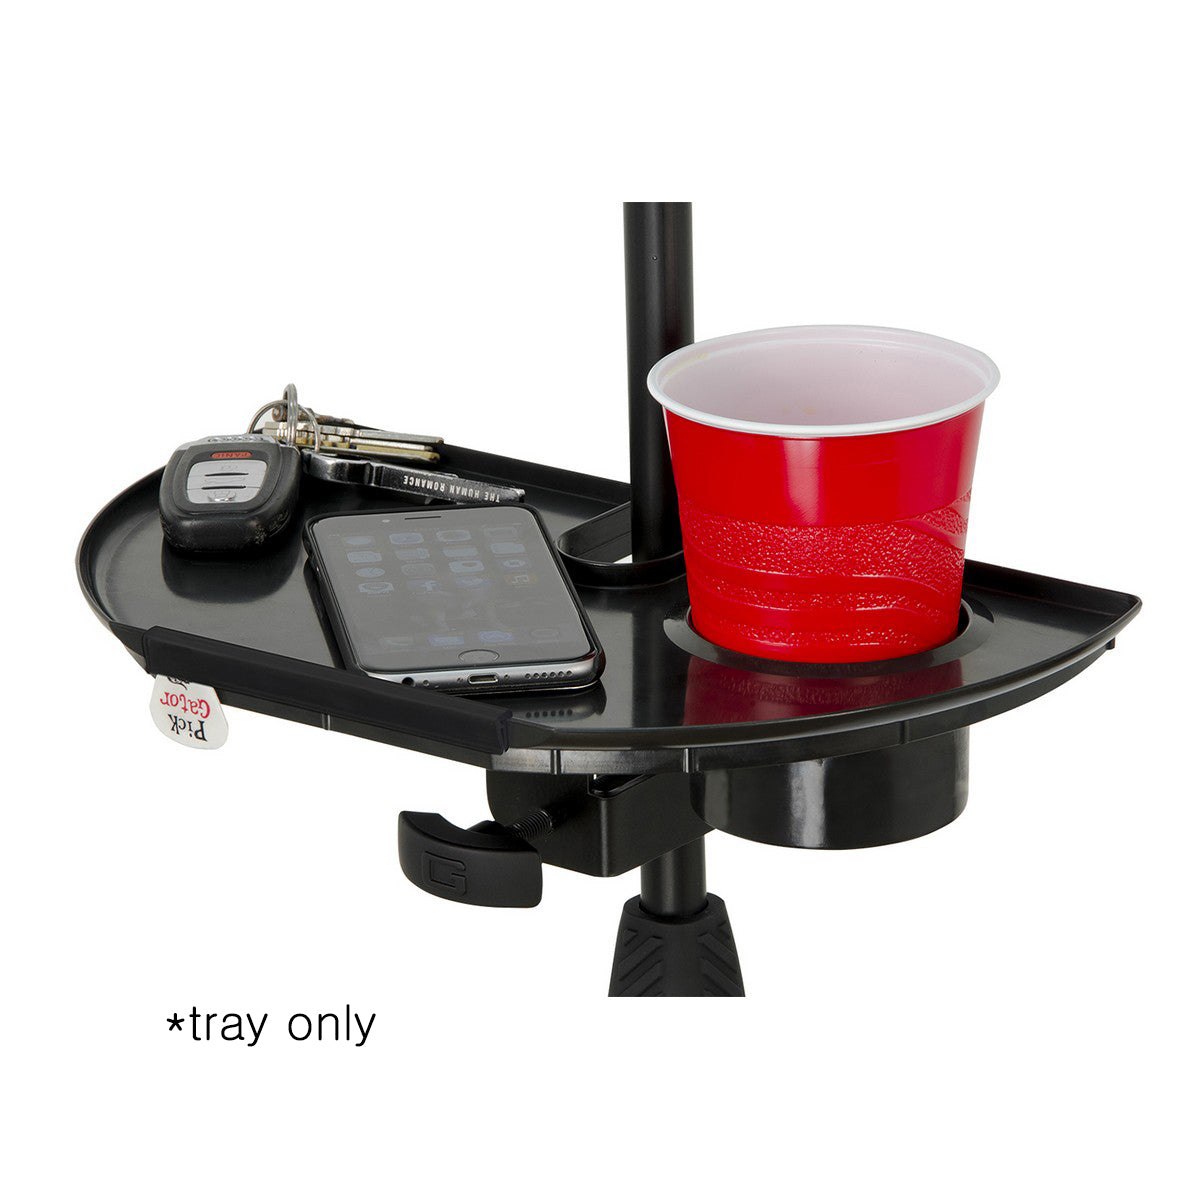 Gator Cases GFW-MICACCTRAY | Gator Frameworks Microphone Stand Accessory Tray